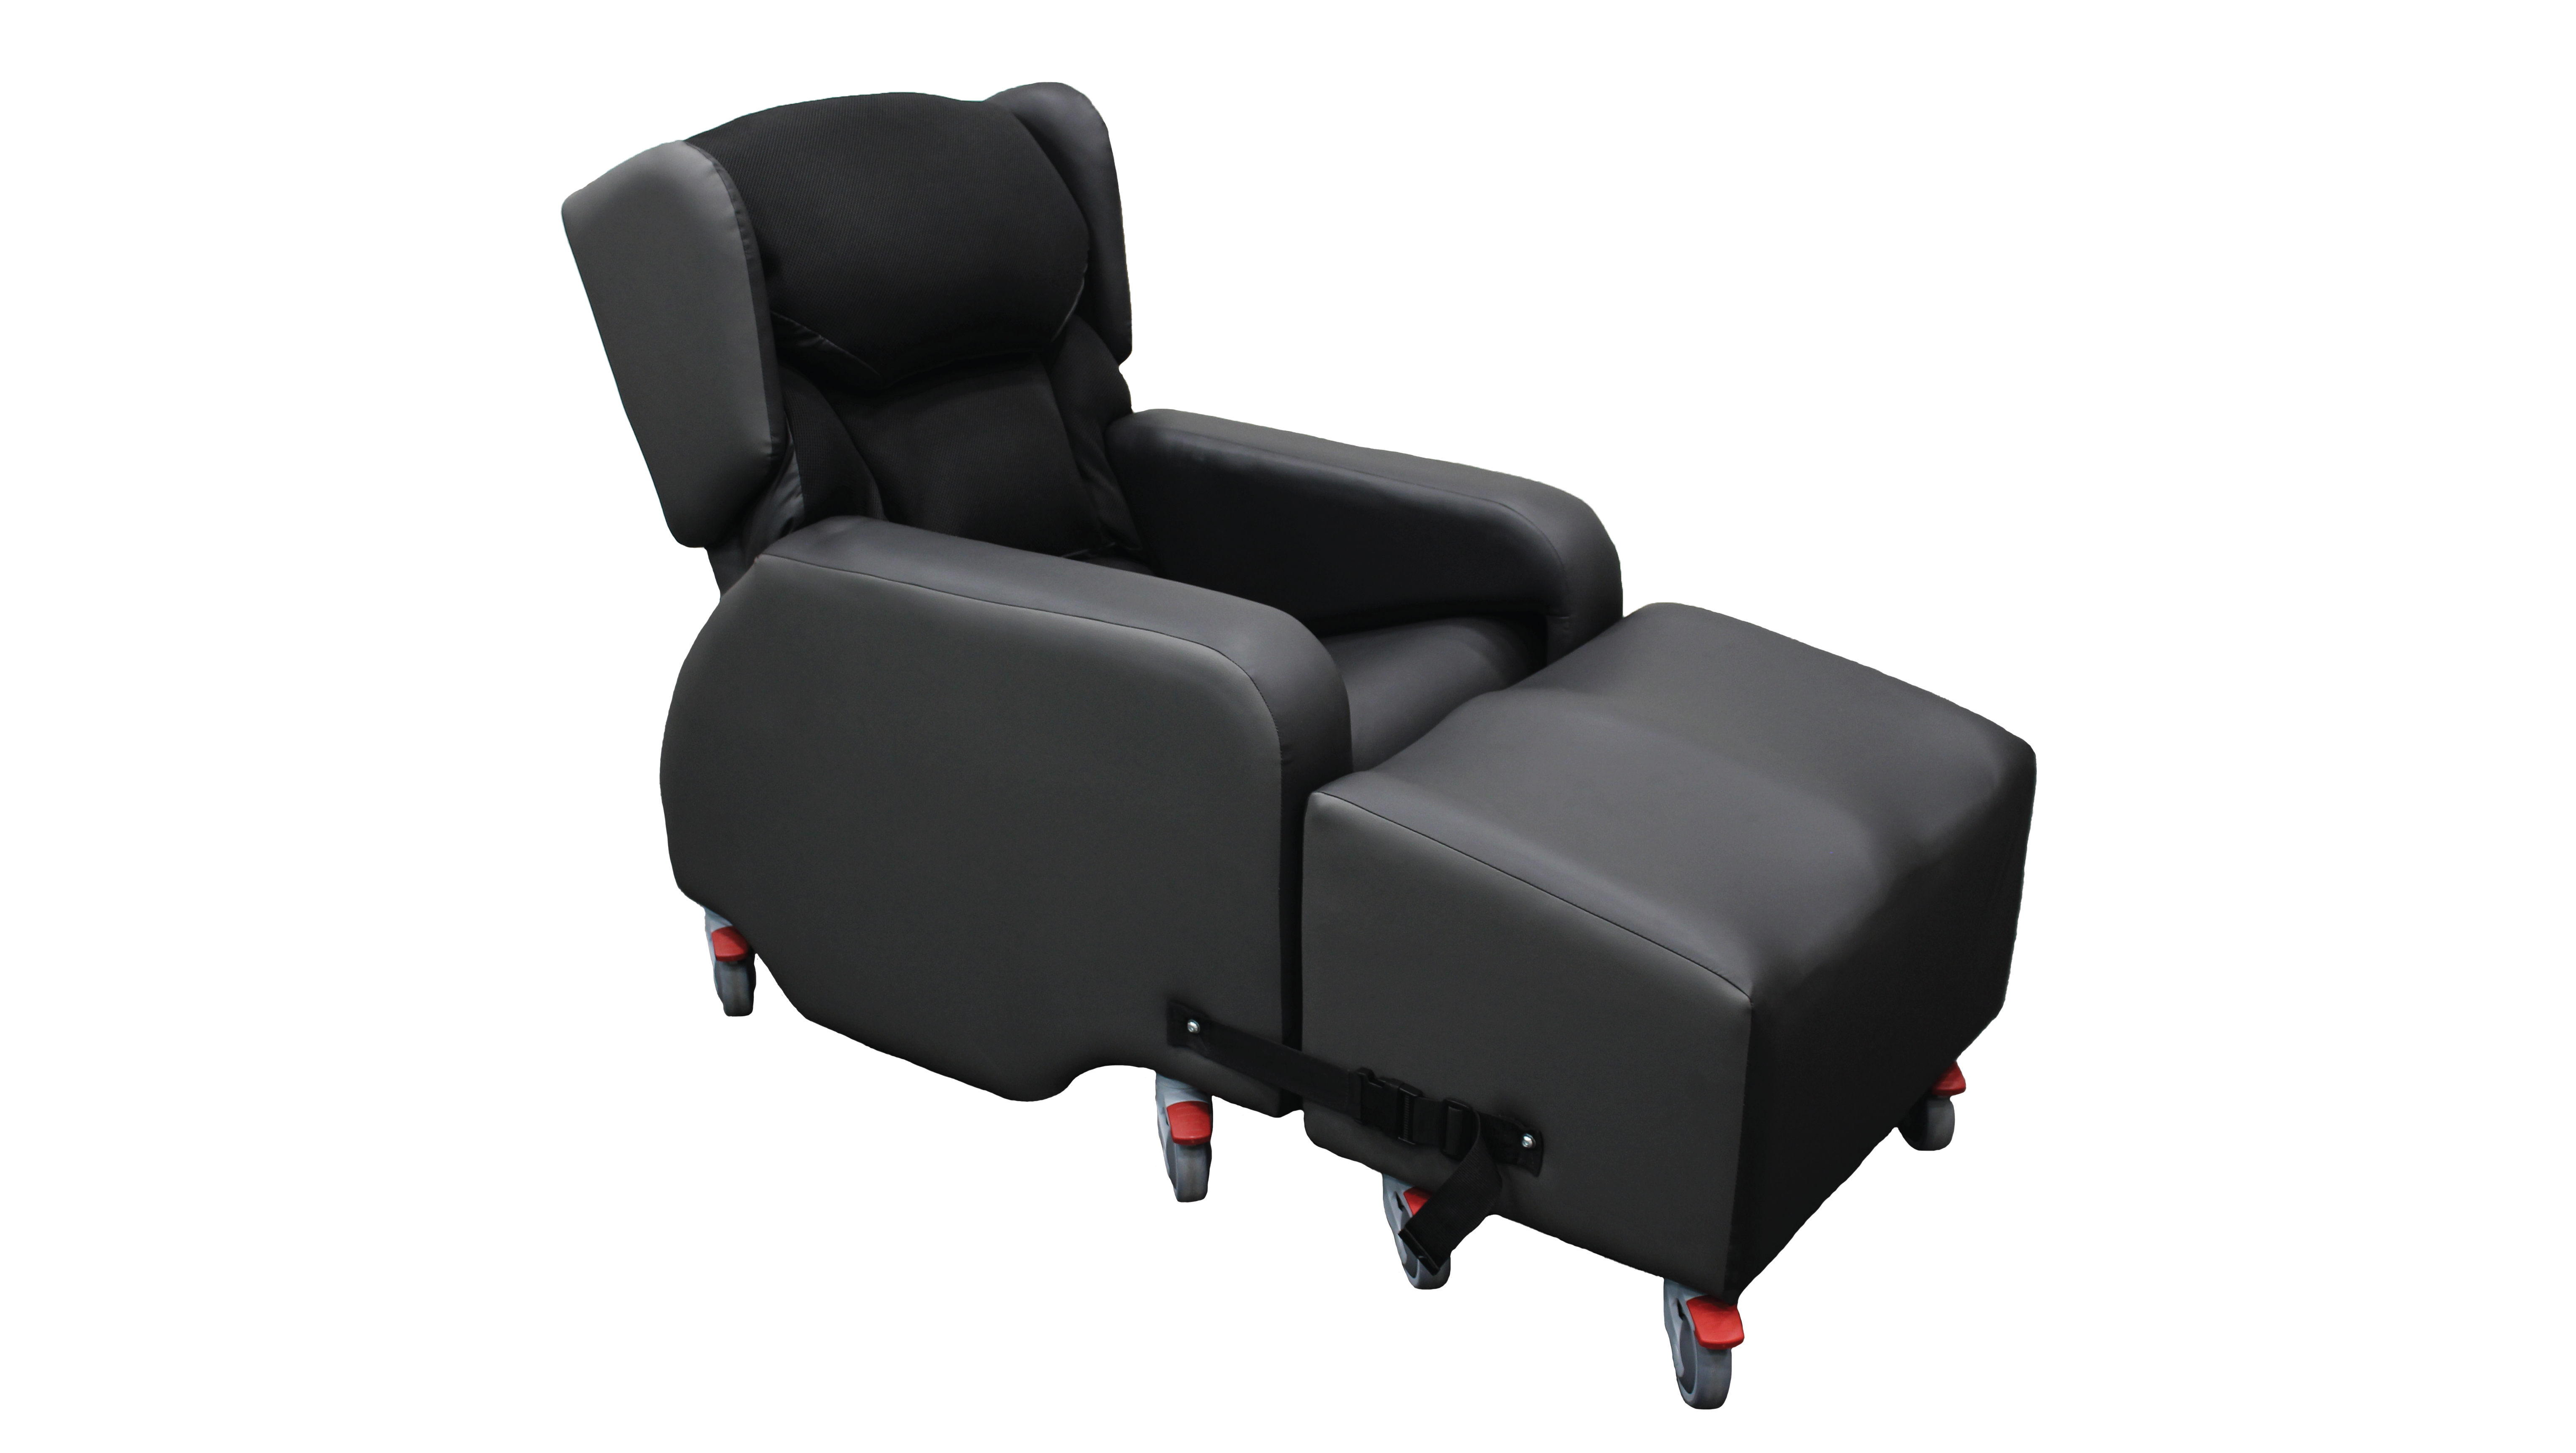 Product shot of the Lento Neuro disability recliner chair with wheels. Full shot from a 30° angle.